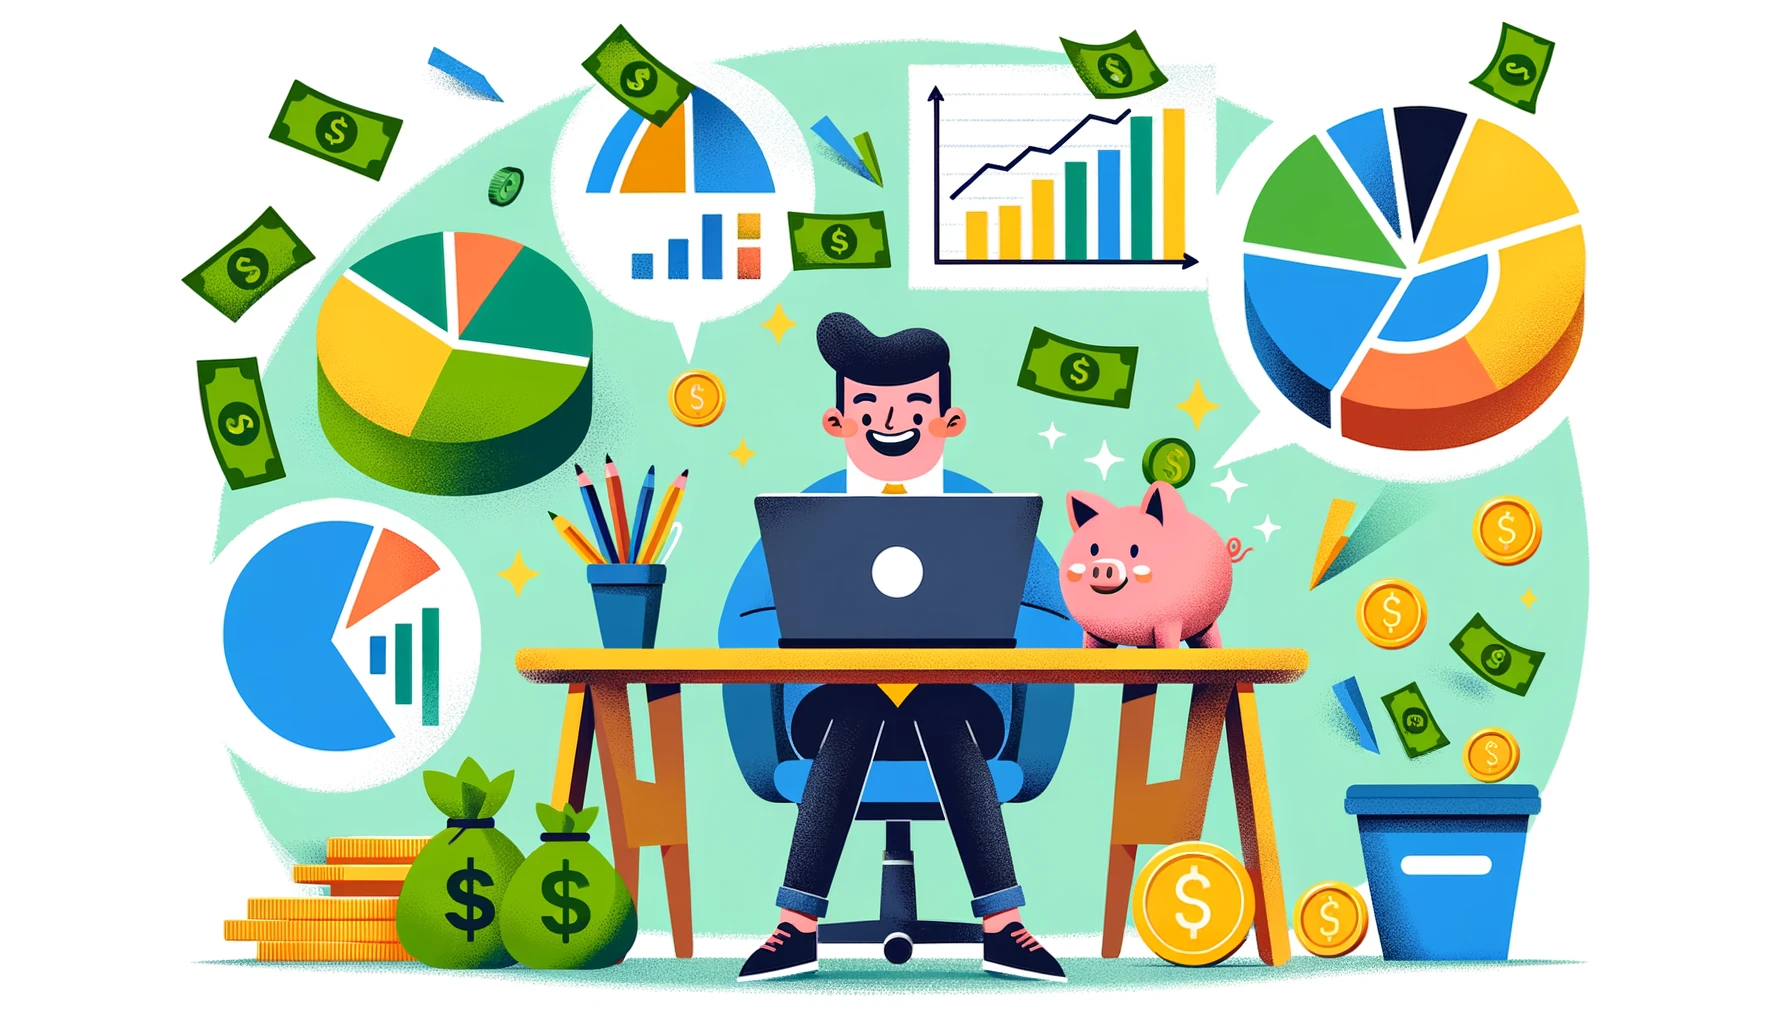 A vibrant cartoon depicts a cheerful individual at a desk, engaging with a laptop that showcases colorful pie charts and graphs, symbolizing the management of personal finances. Surrounded by symbols of savings like piggy banks, coins, and bills, the scene is set against a money green background, illustrating the successful application of the 50/20/30 budget rule for balanced financial planning. The playful and engaging style of the image captures the essence of effectively balancing spending, saving, and enjoying life.